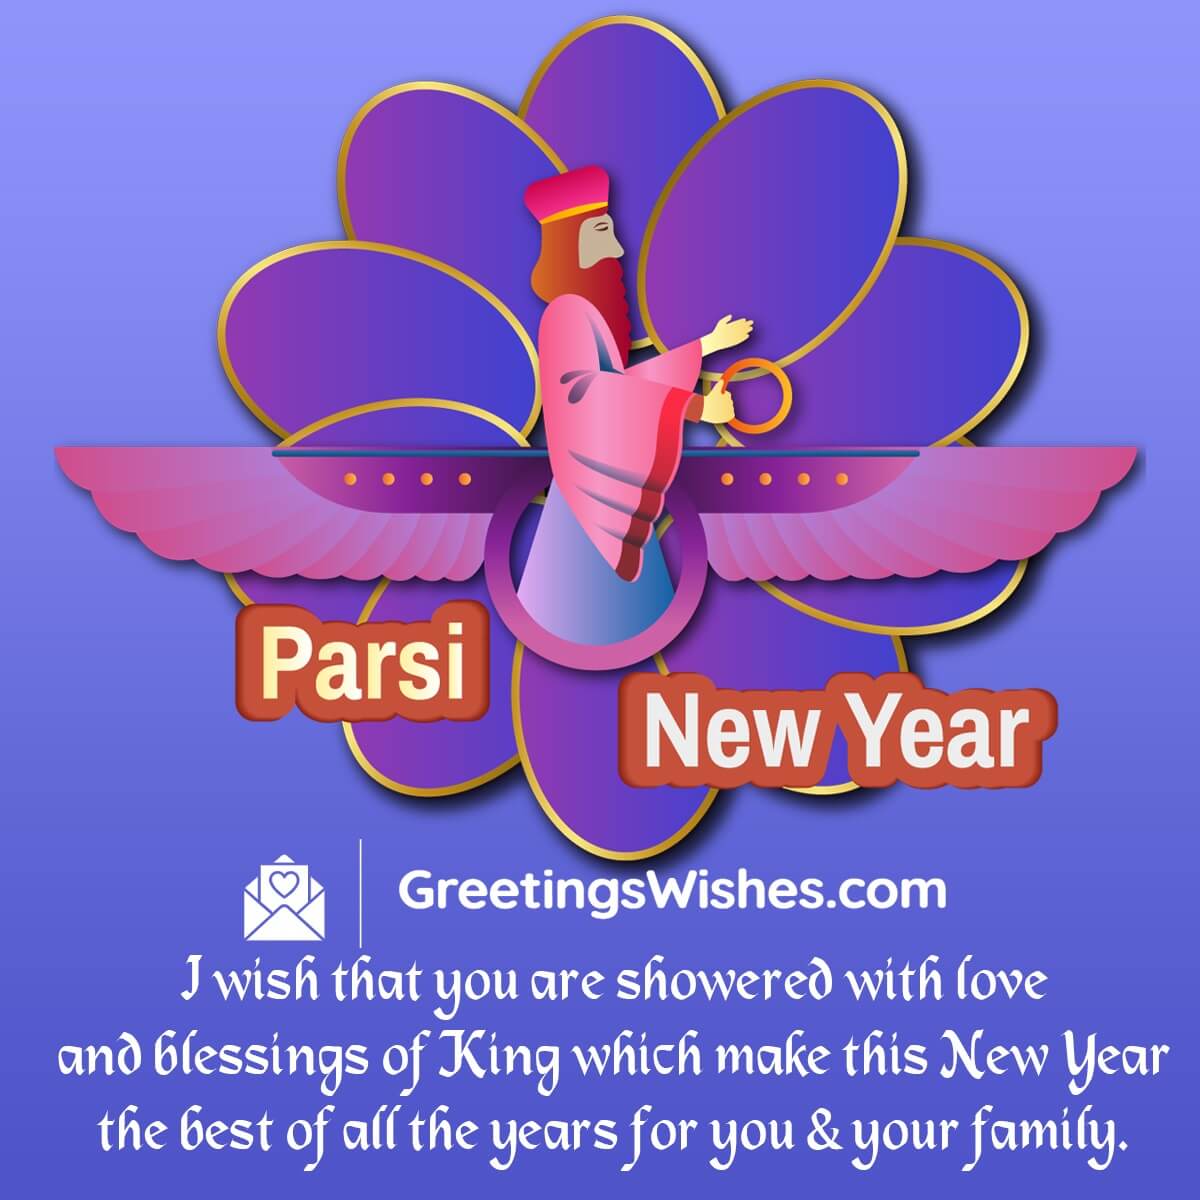 Parsi New Year Blessings